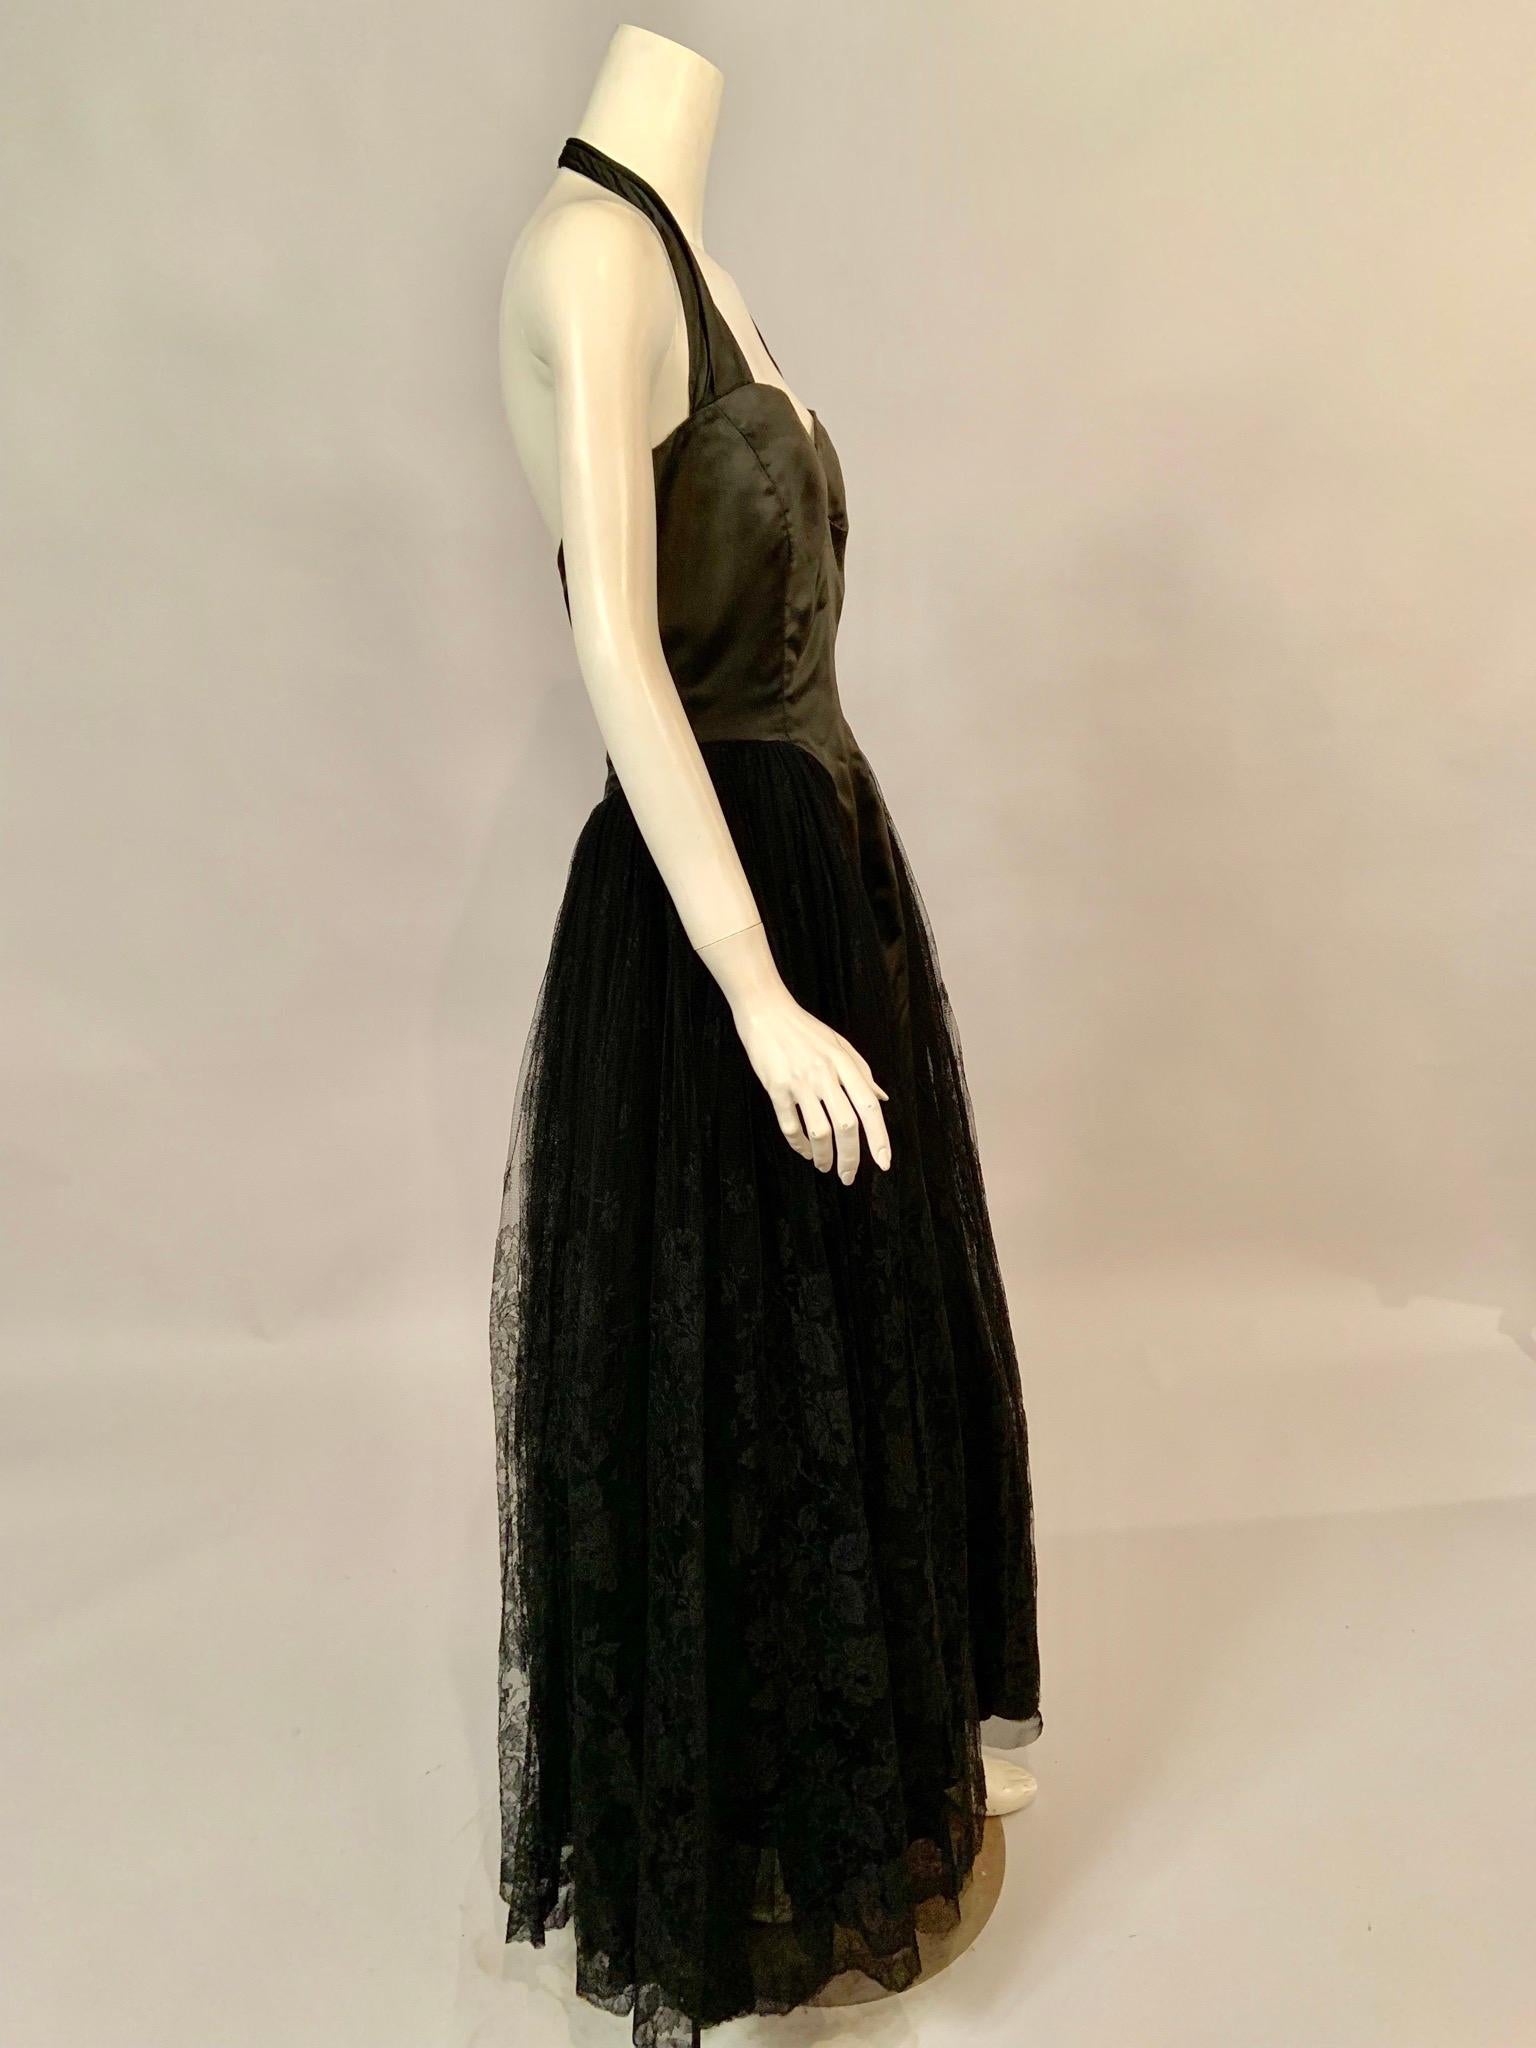 This black satin and lace halter neckline dress from Henri Bendel in New York City has a black satin bodice which runs seamlessly to the hemline at the center front and center back. The bodice is fully lined, boned and weighted at the interior